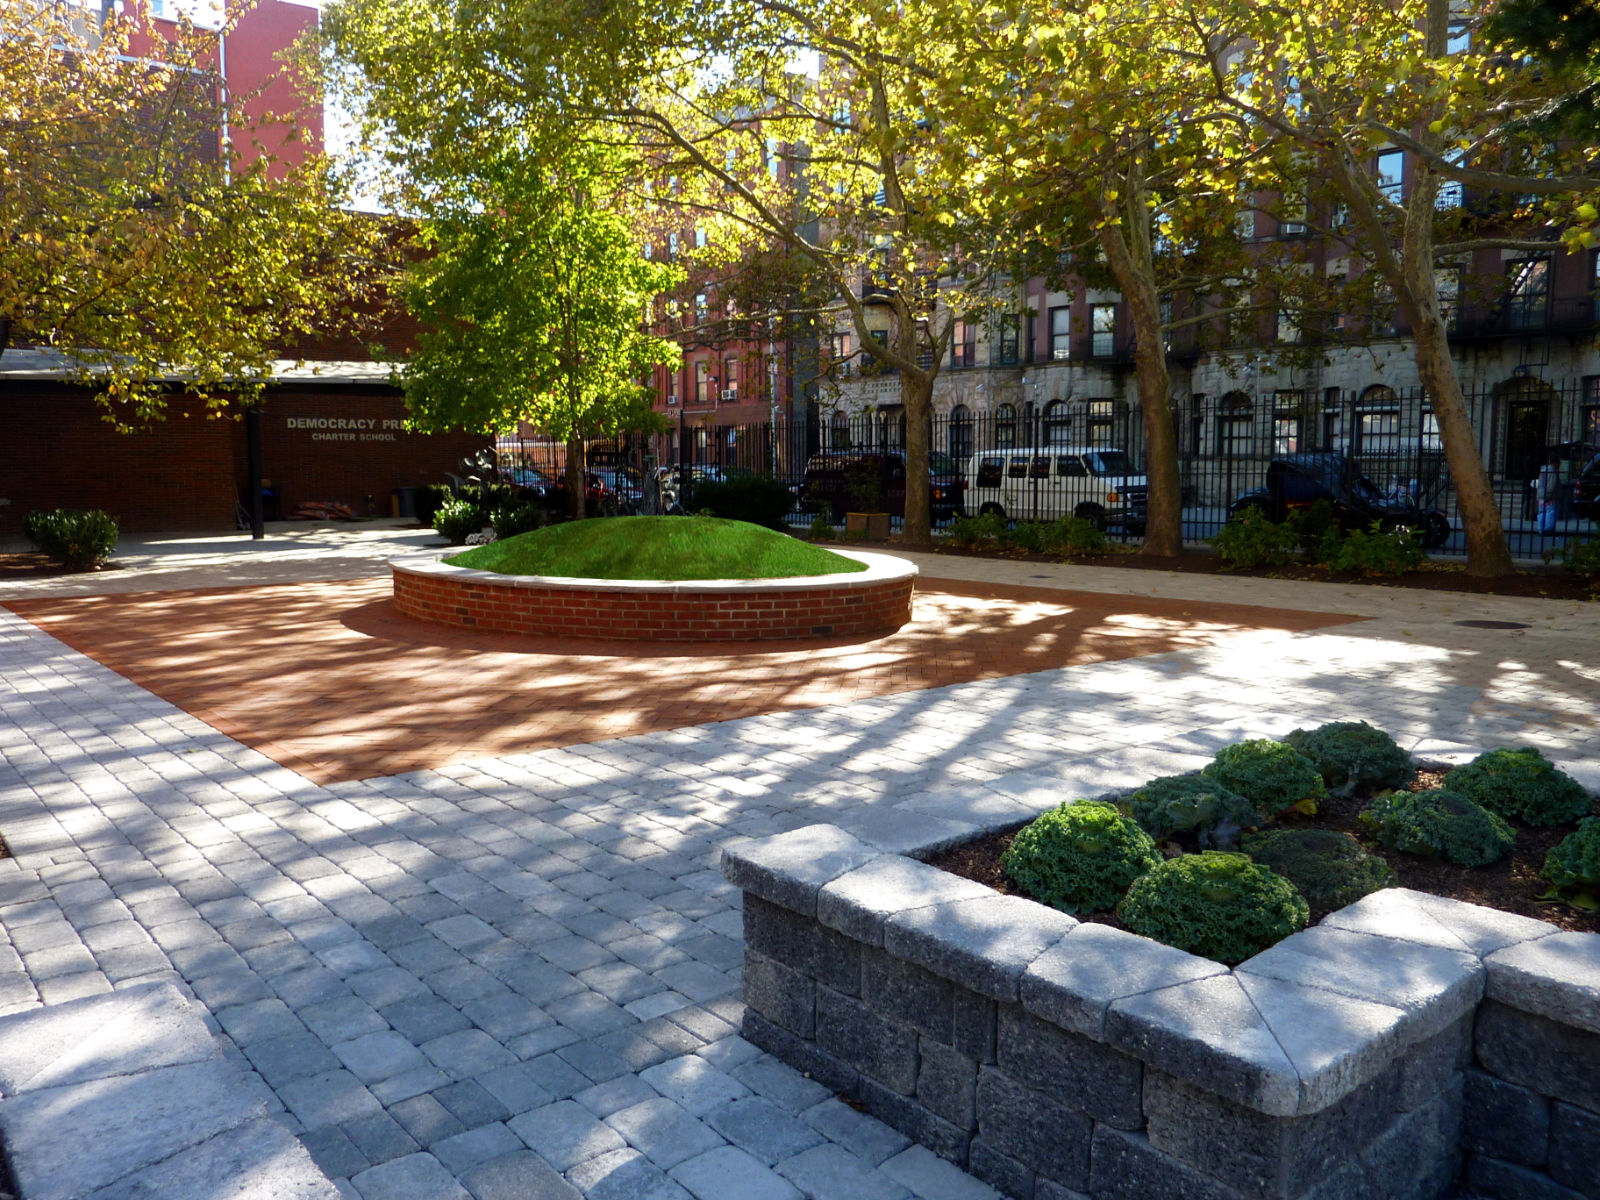 A view of a clean and lush outdoor space near buildings